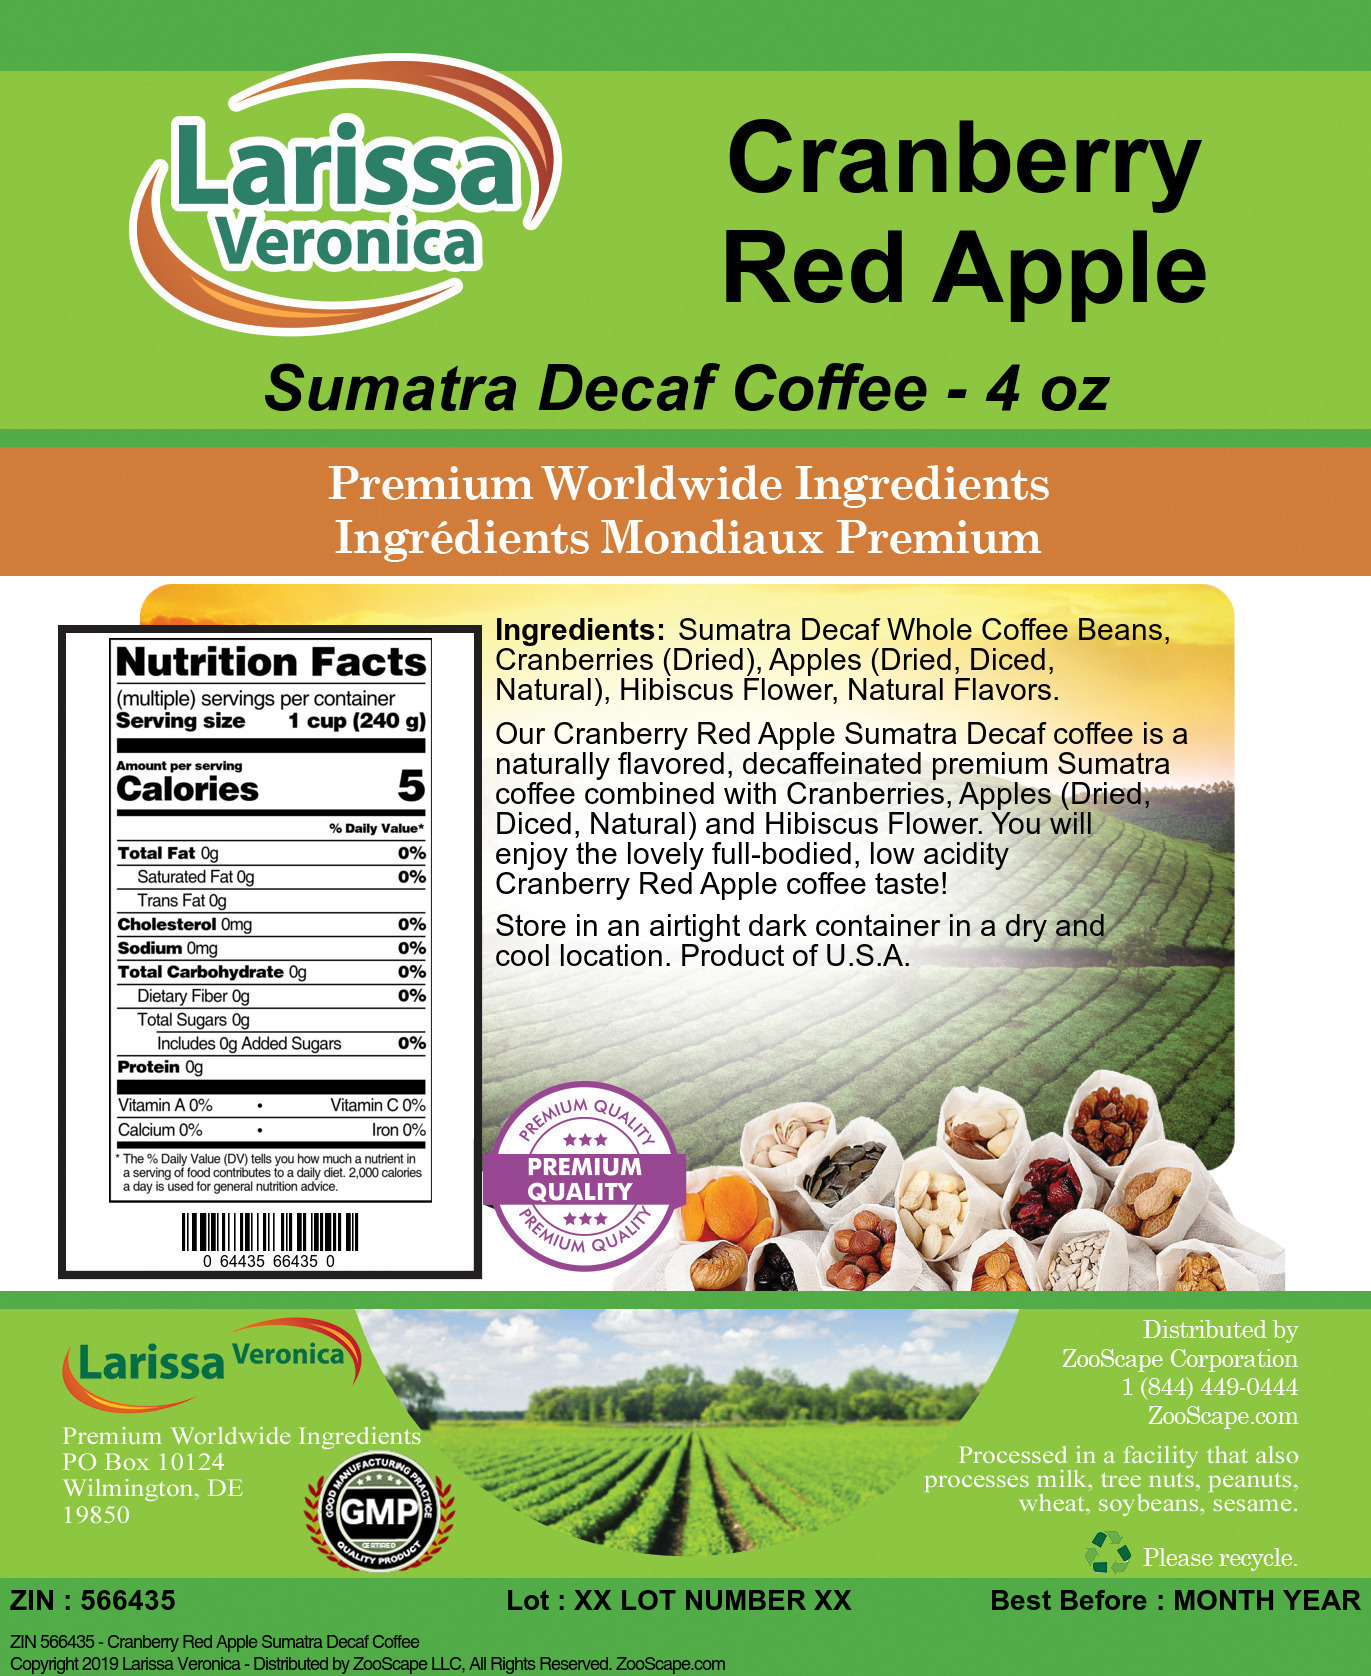 Cranberry Red Apple Sumatra Decaf Coffee - Label